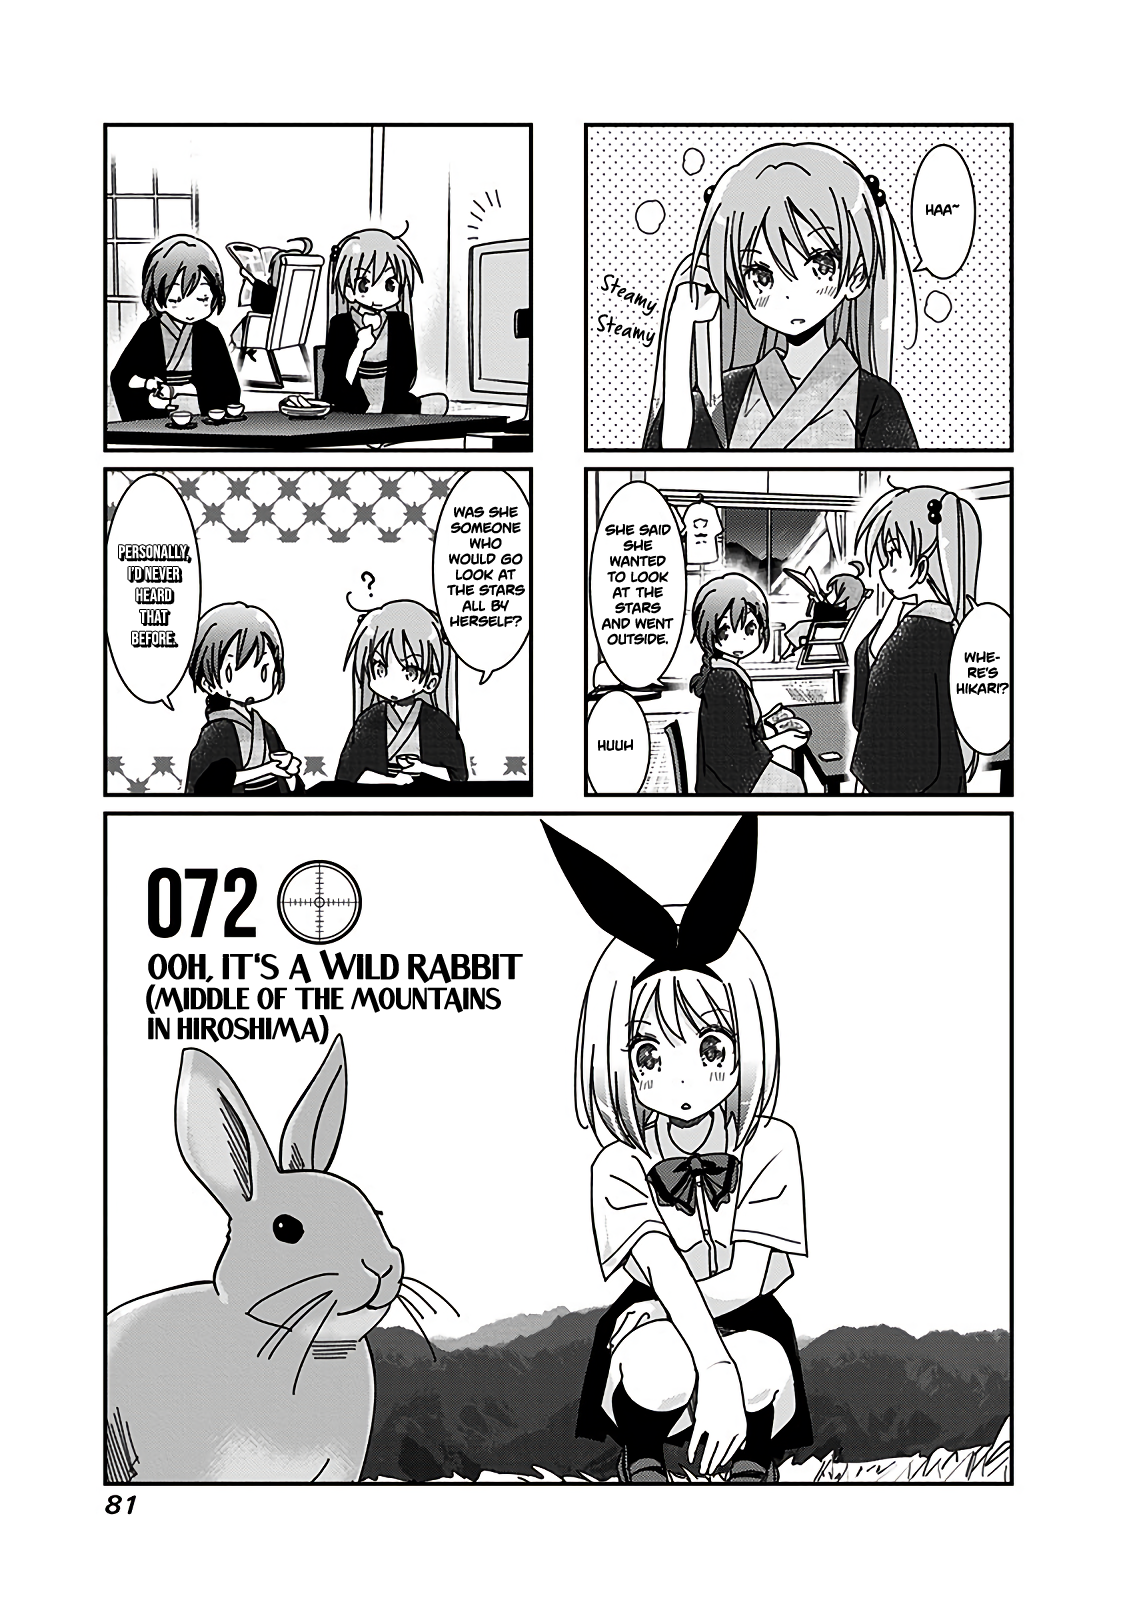 Rifle Is Beautiful Vol.4 Chapter 72: Ooh, It's A Wild Rabbit (Middle Of The Mountains In Hiroshima) - Picture 2